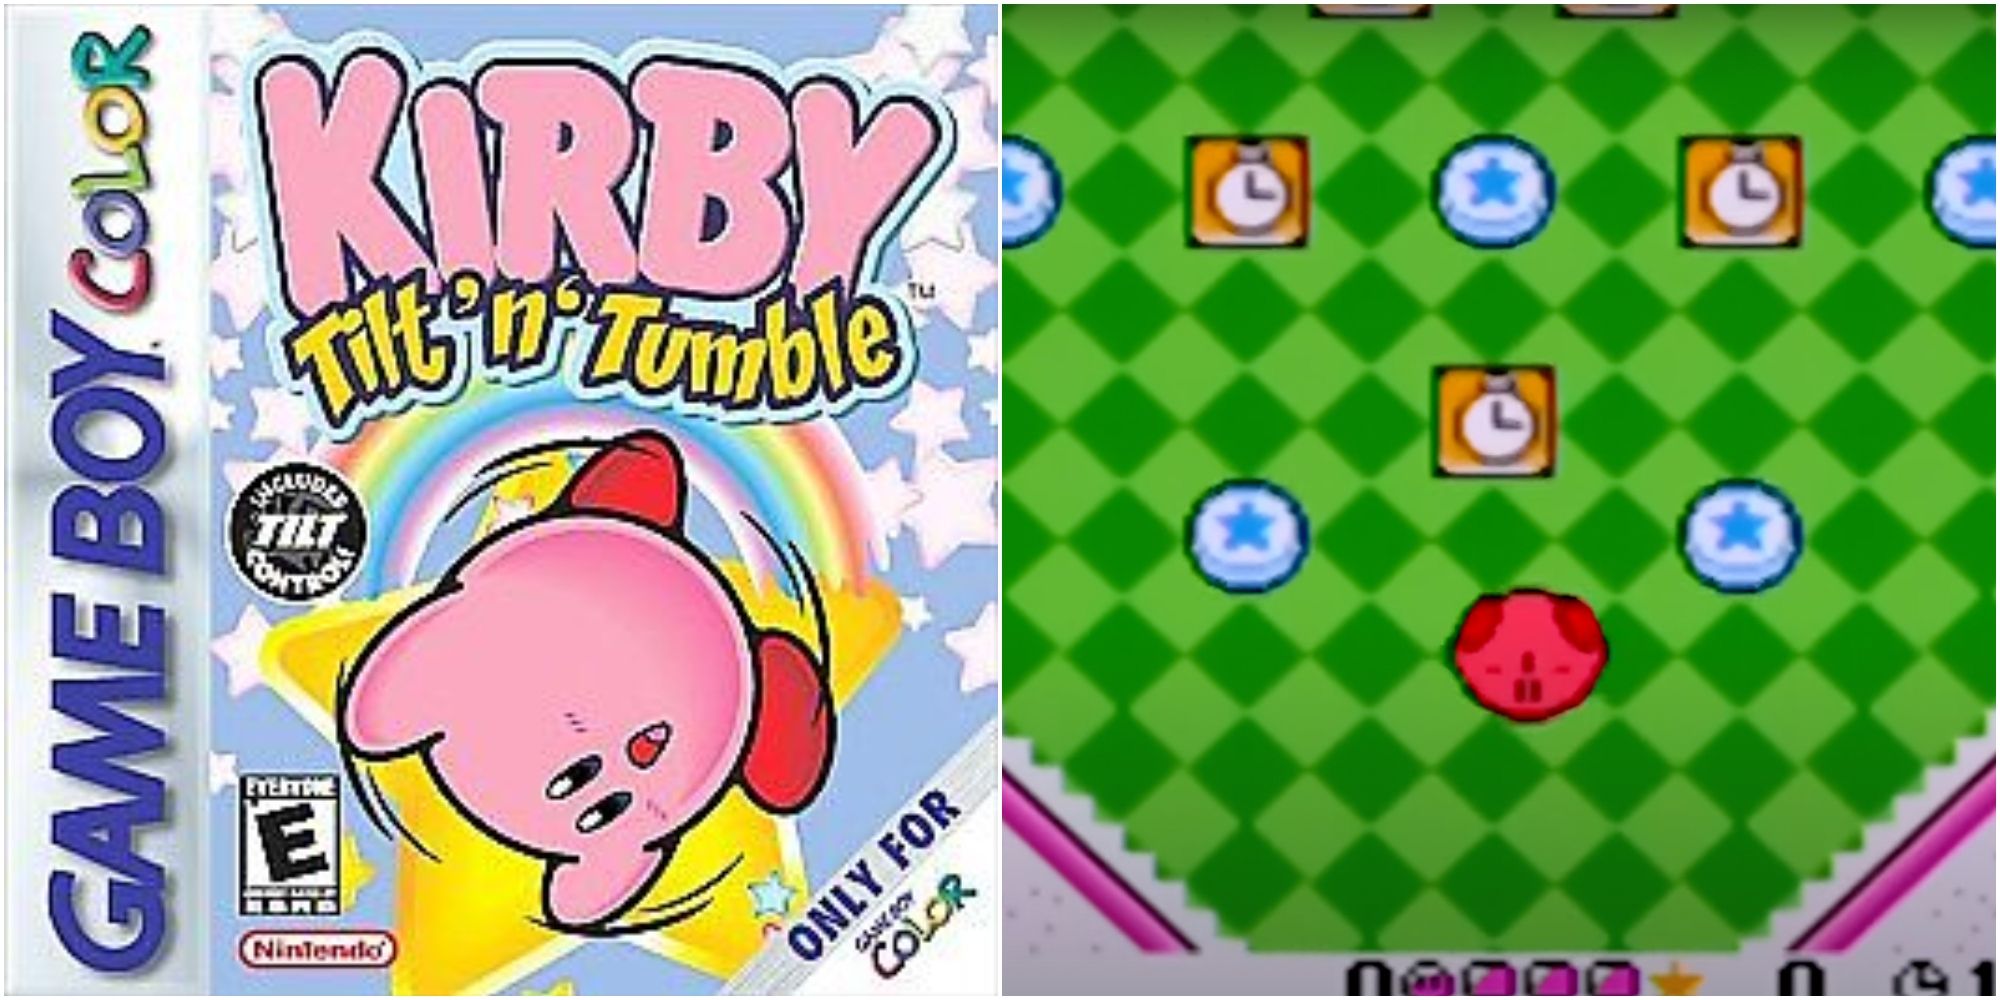 Kirby Tilt 'n' Tumble Game Boy Color game cover, next to a screenshot of gameplay where Kirby is rolling around